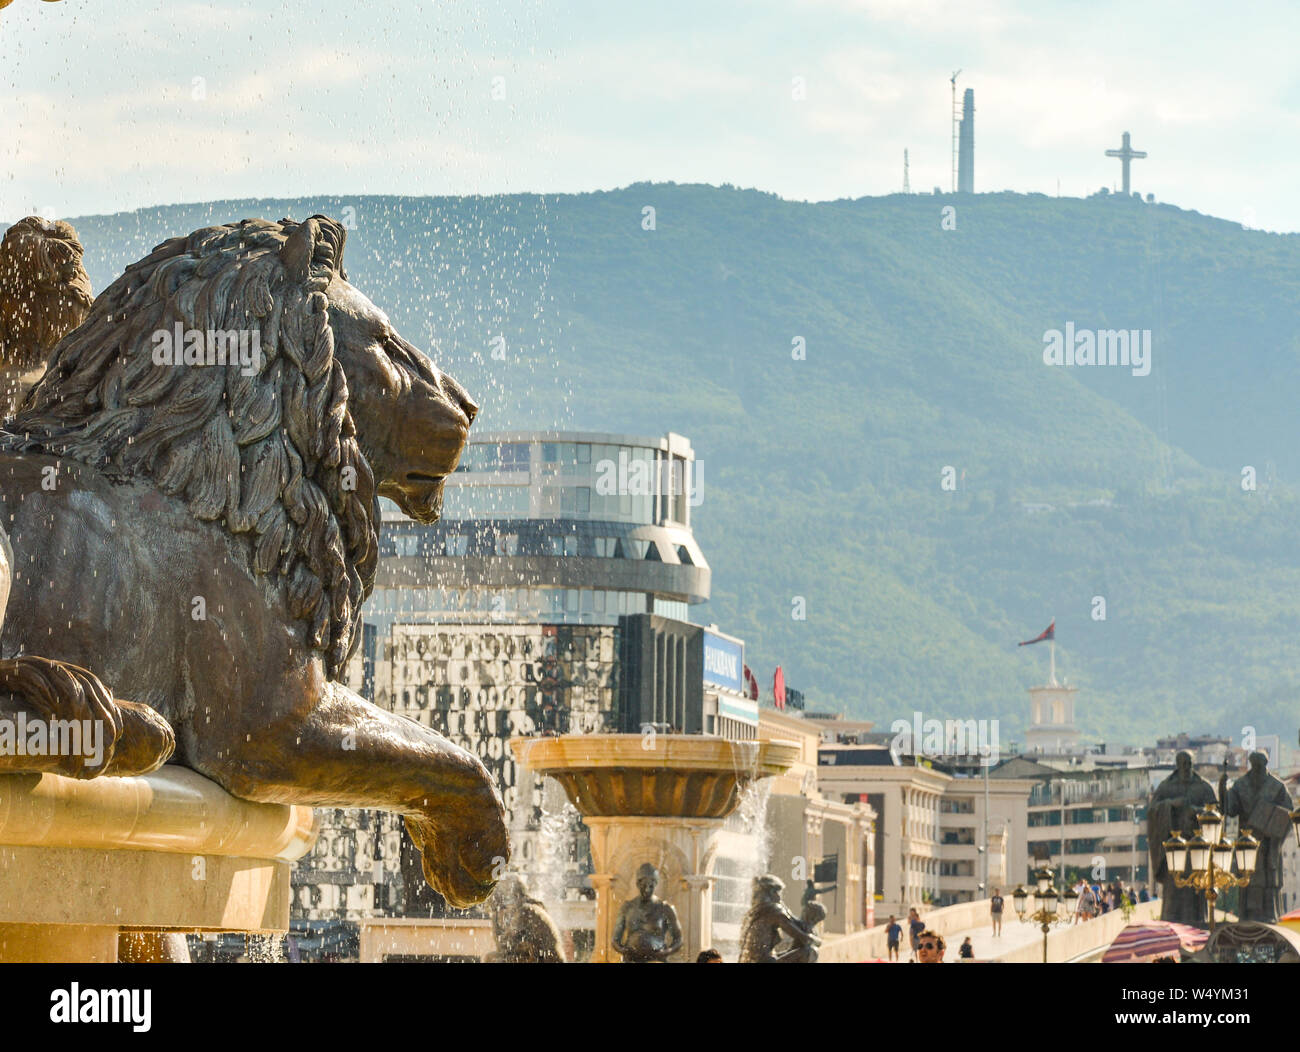 SKOPJE,REPUBLIC OF NORTH MACEDONIA-AUGUST 25 2018:Millennium Cross (background) overlooks the Statues and fountains at the Place next tothe Museum of Stock Photo